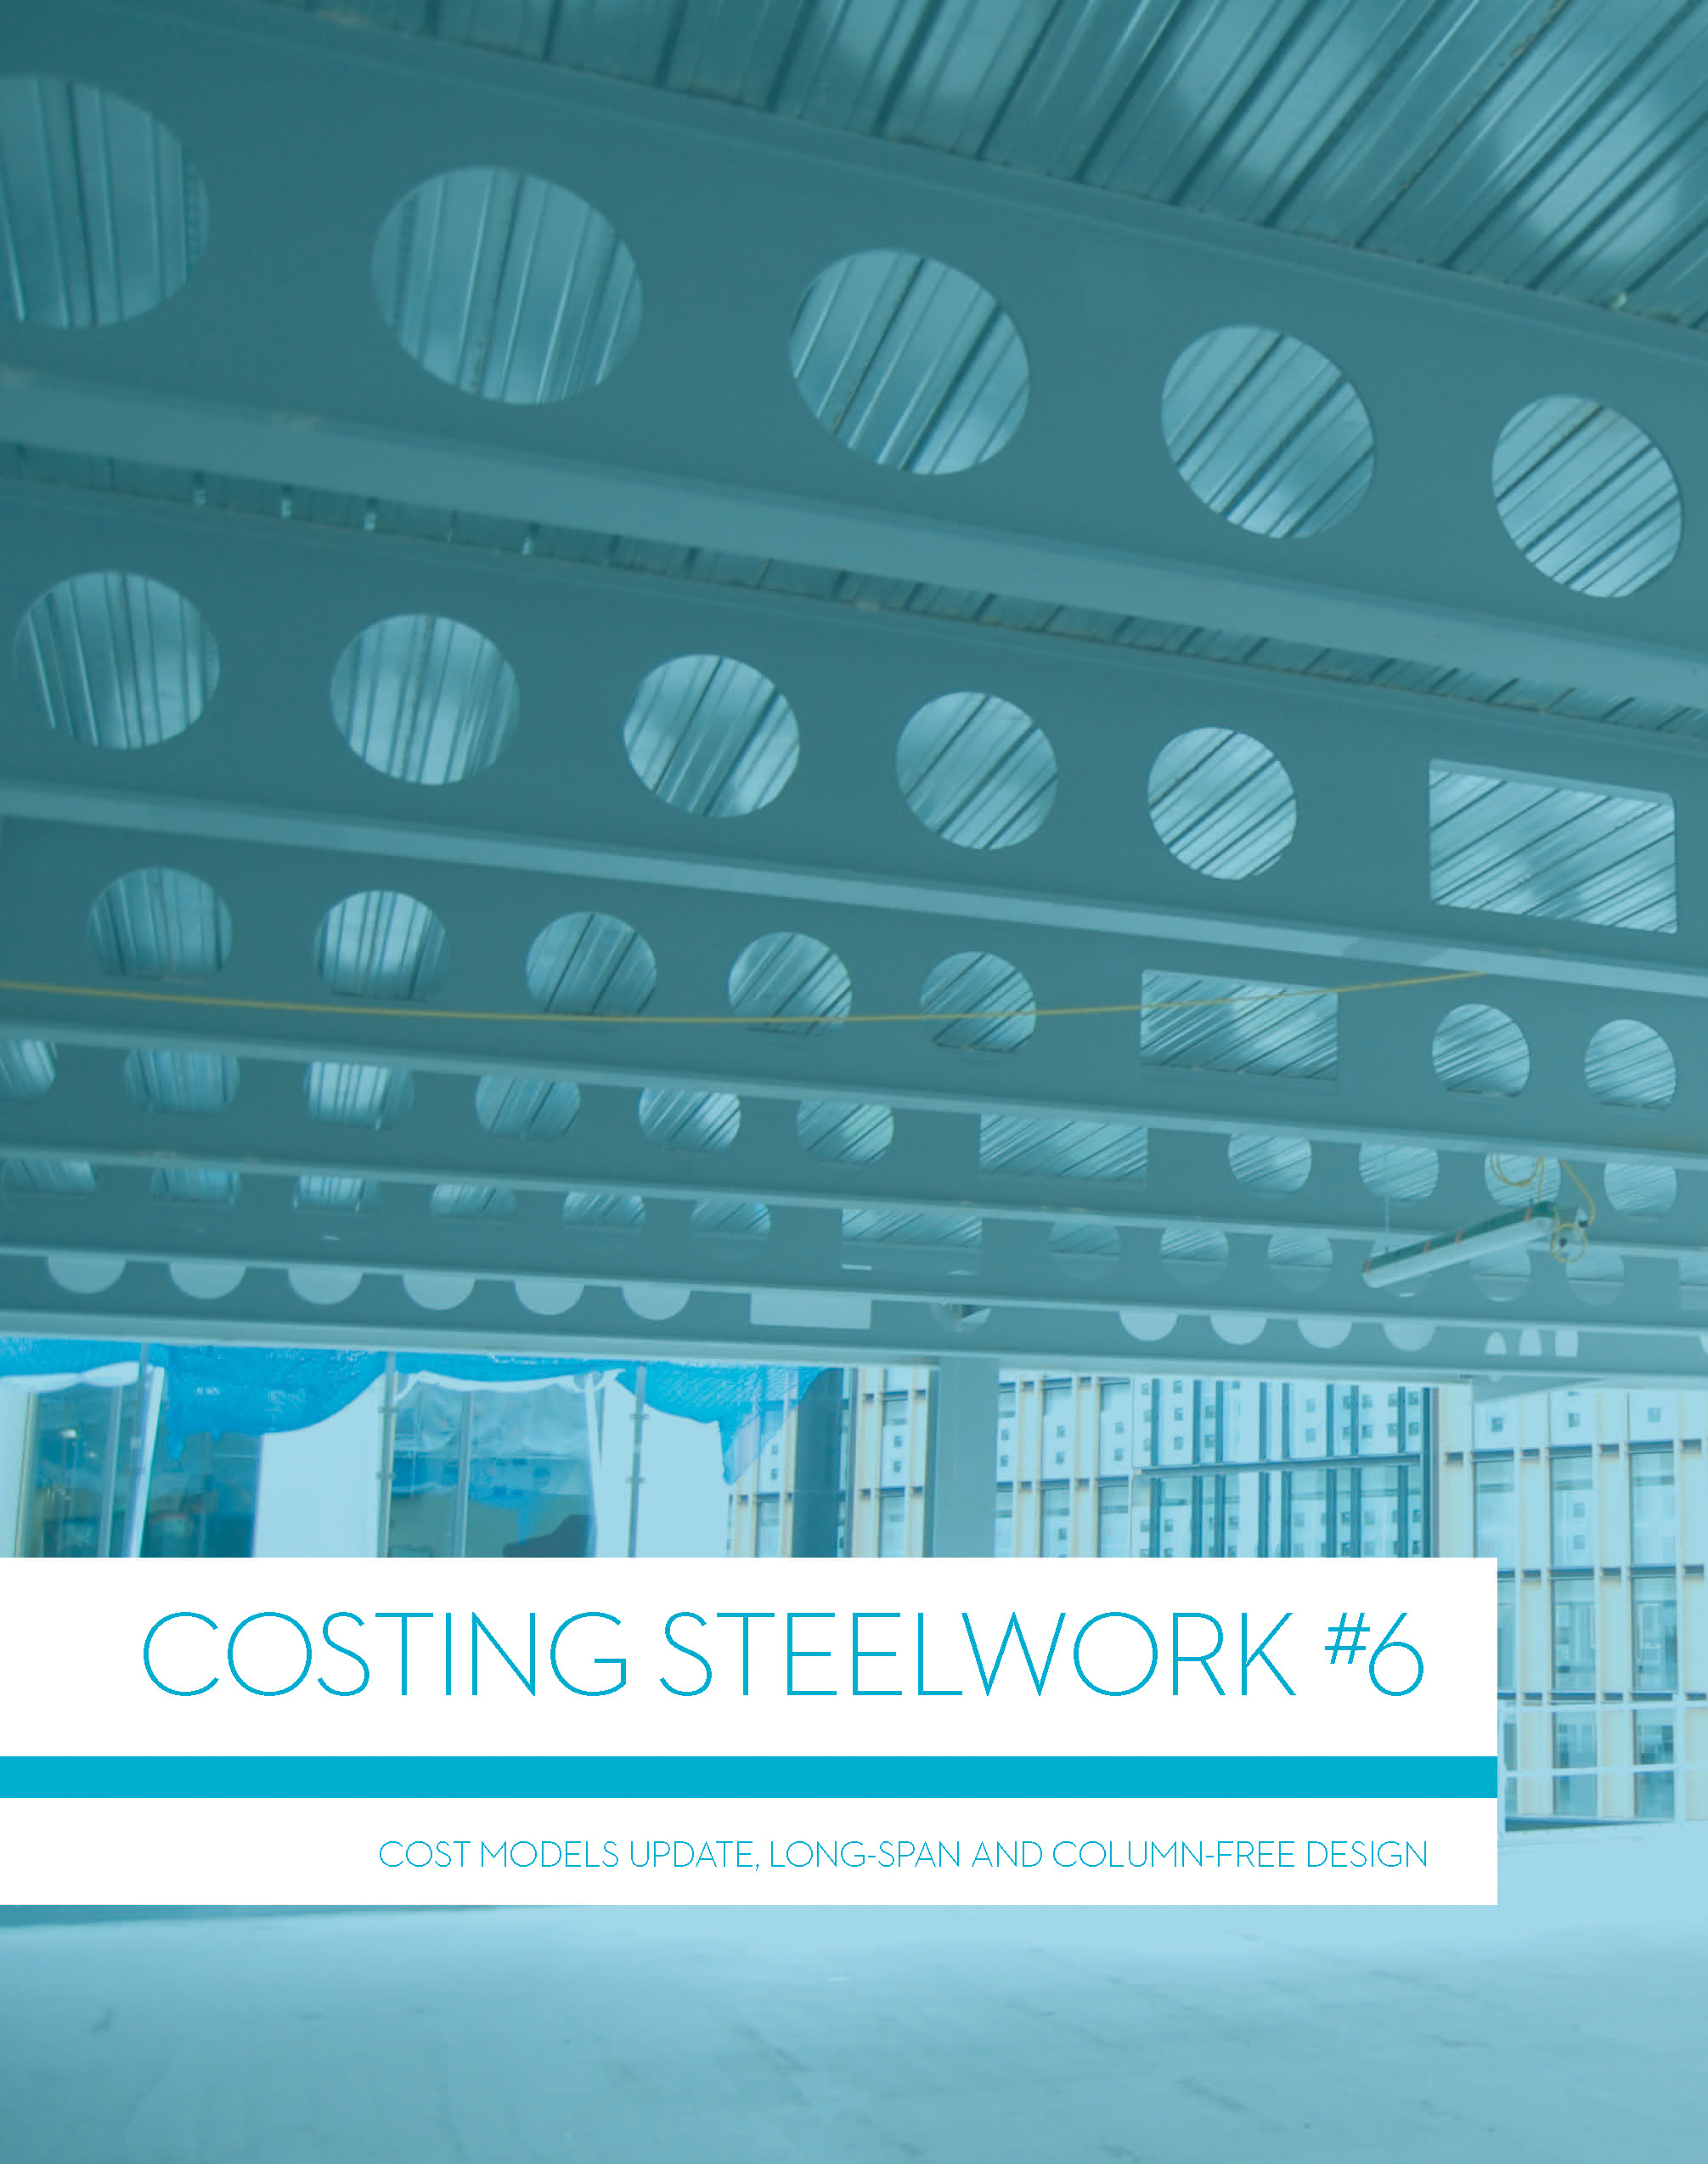 Costing Steelwork July 2018 cost model update